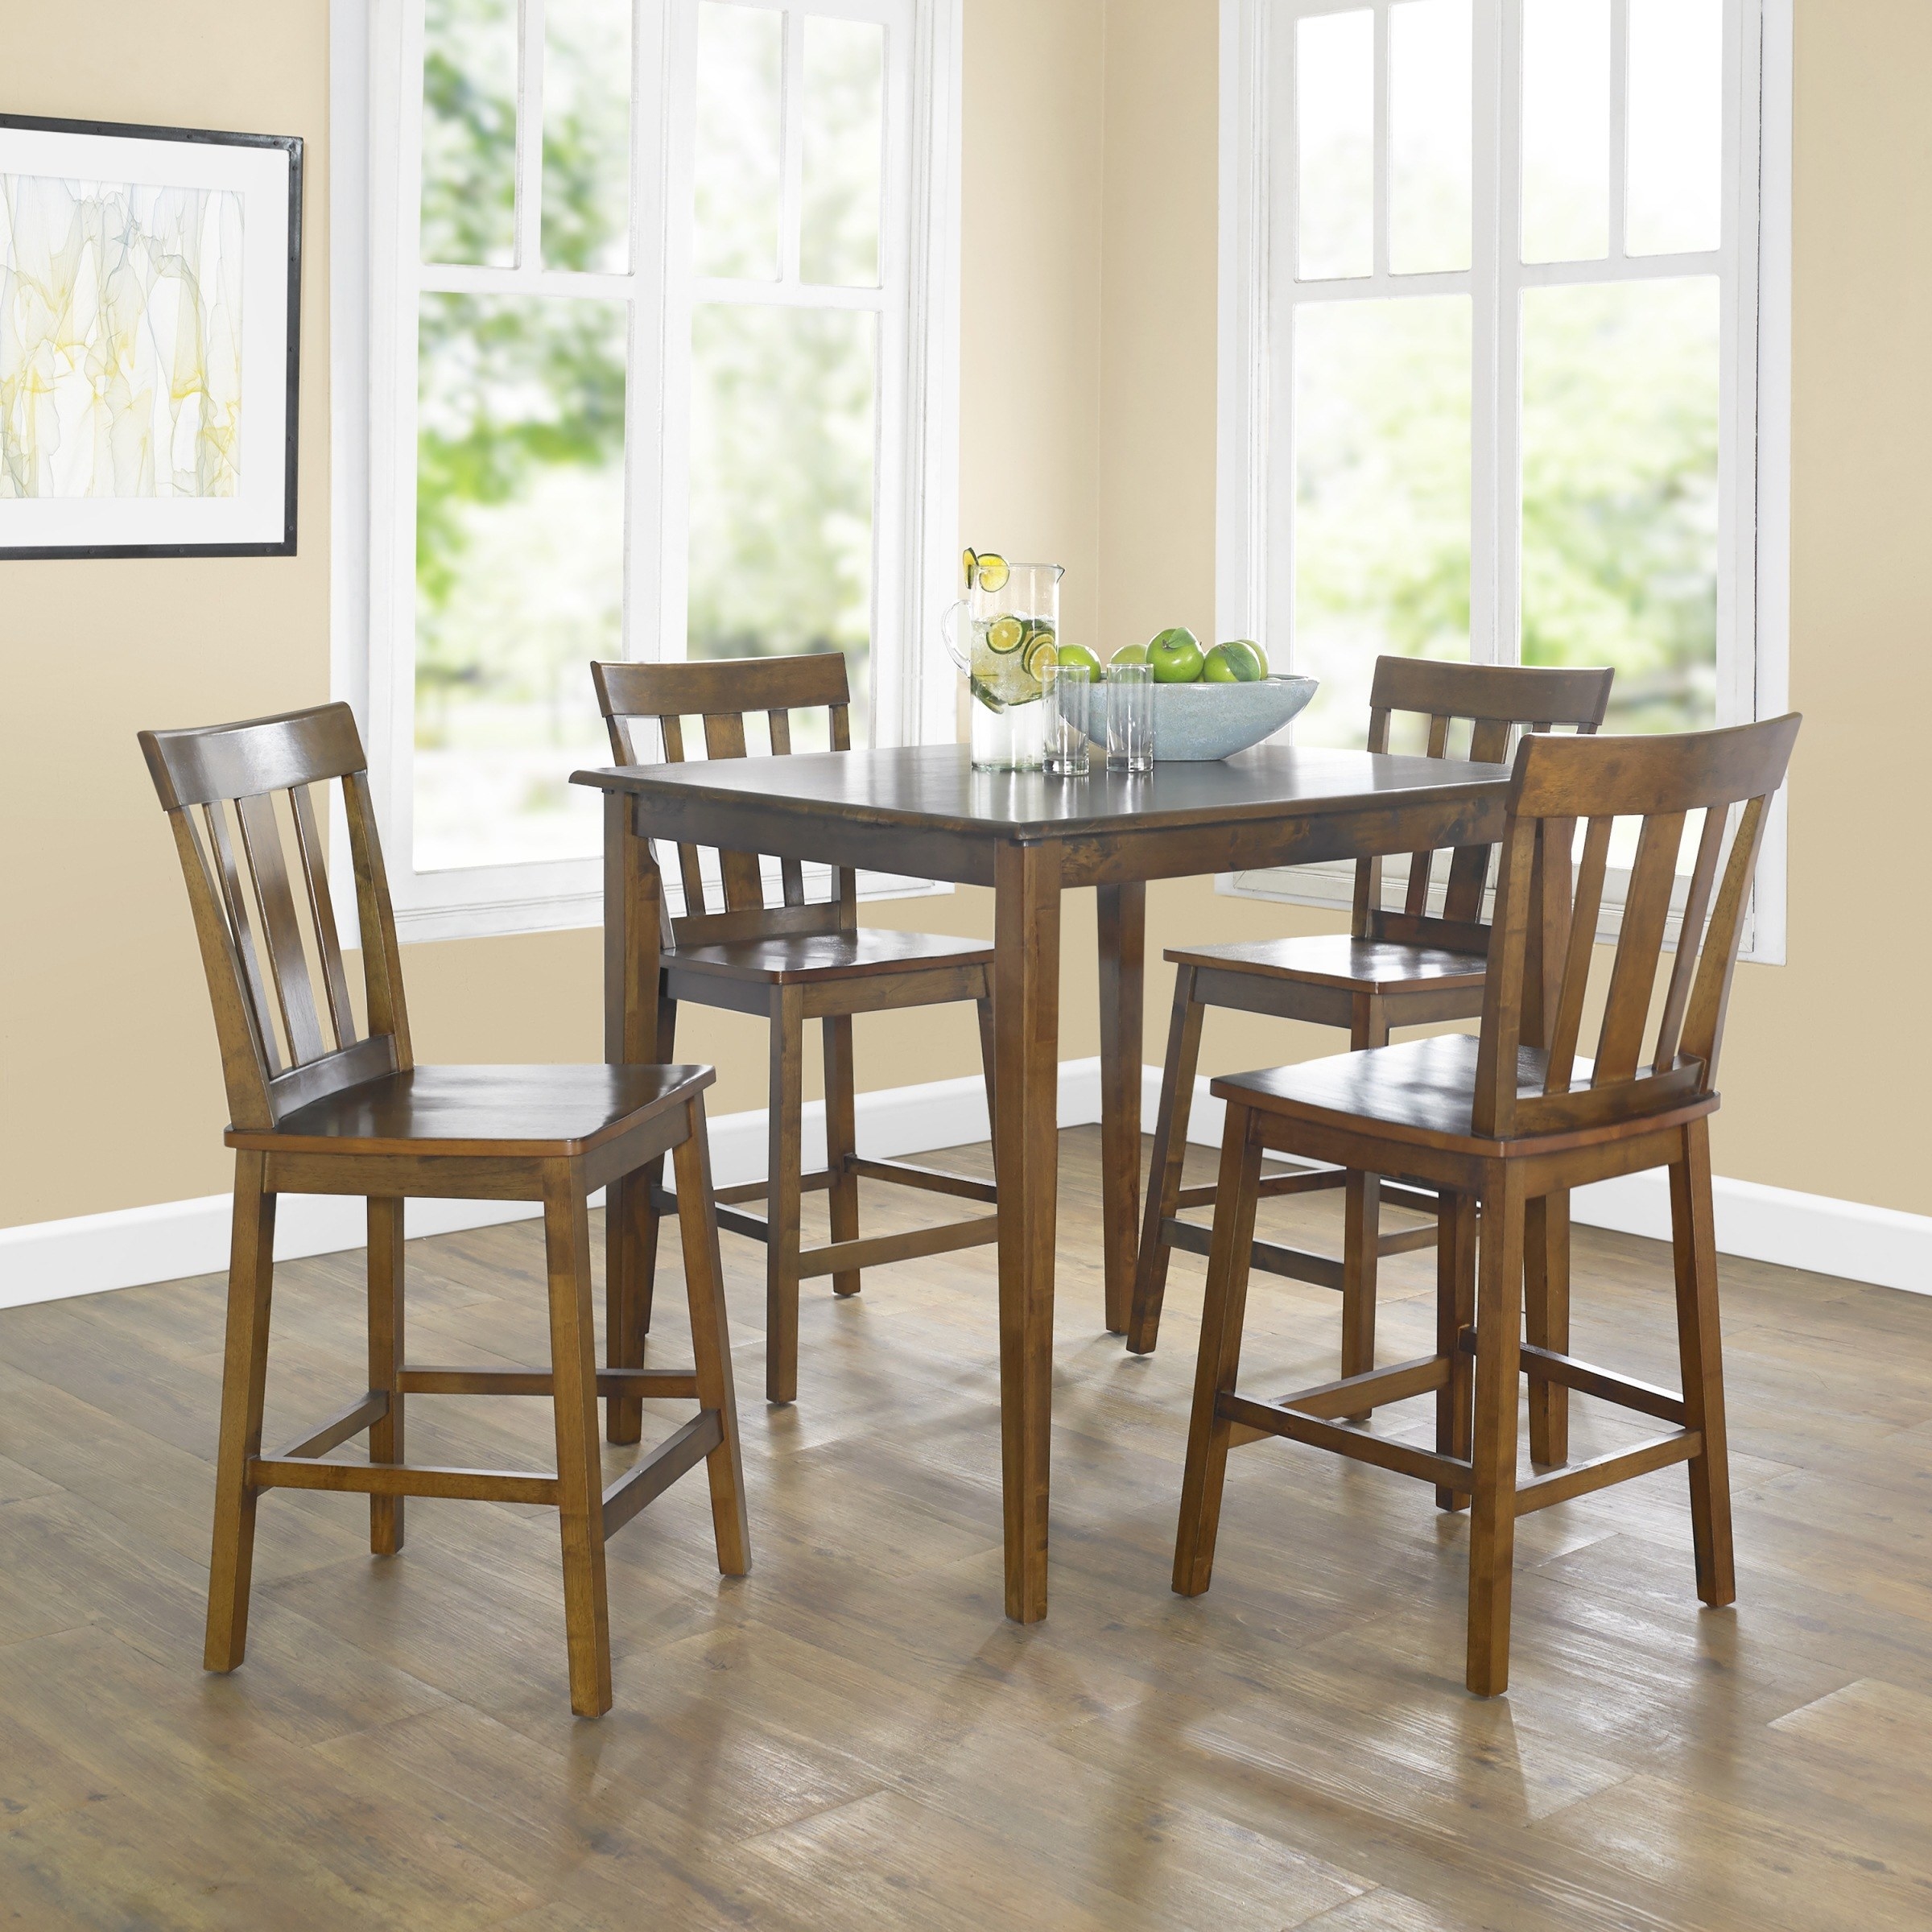 the tall brown table set